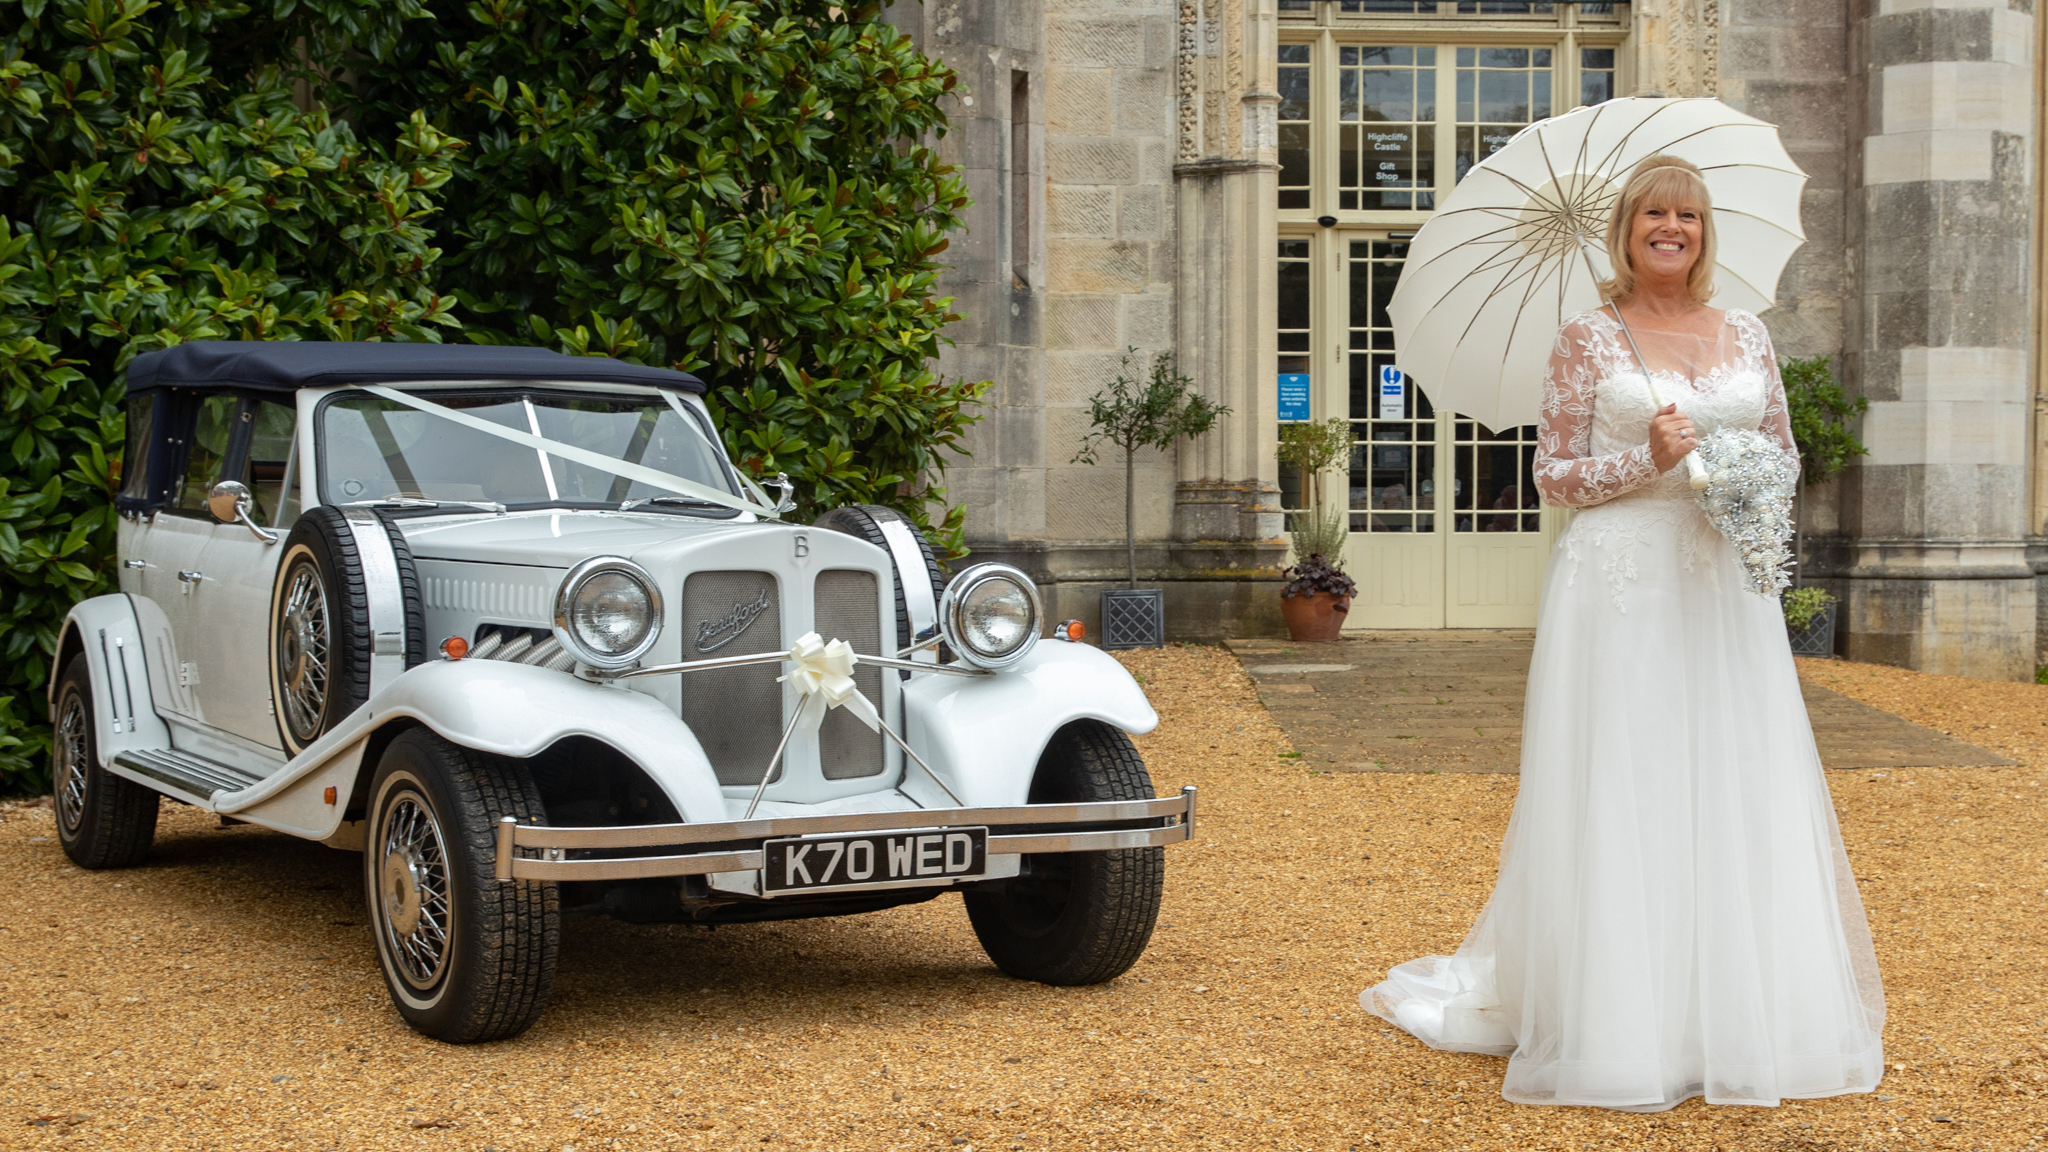 White vintage Beauford convertible with roof up decorated with white ribbon and bow at a local Faversham wedding. Smiling bride standing next to the vehicle with a white umbrella h